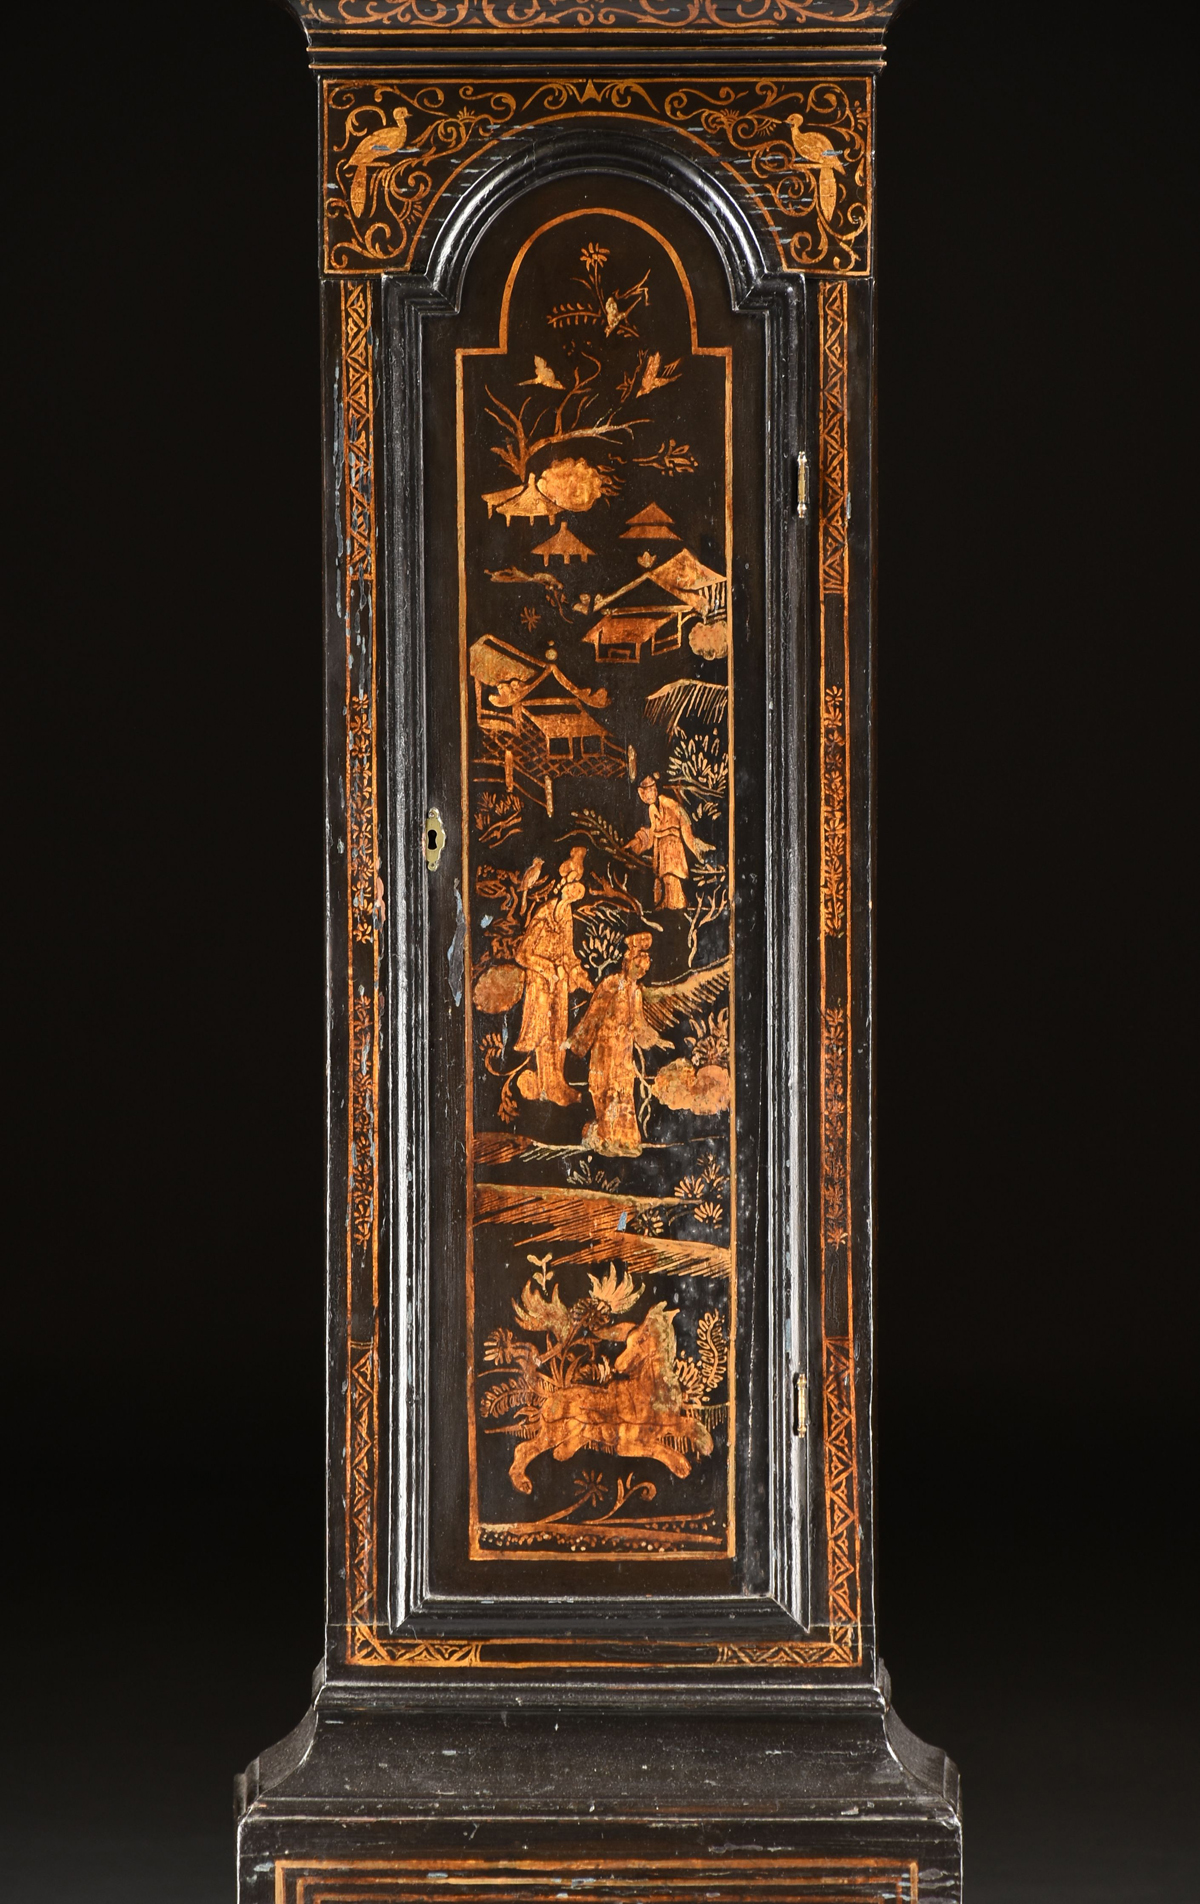 A GEORGE III (1760-1820) JAPANNED CHINOISERIE TALL CASE CLOCK, BY JOHN BAIRD (Active 1770-1830), - Image 5 of 11